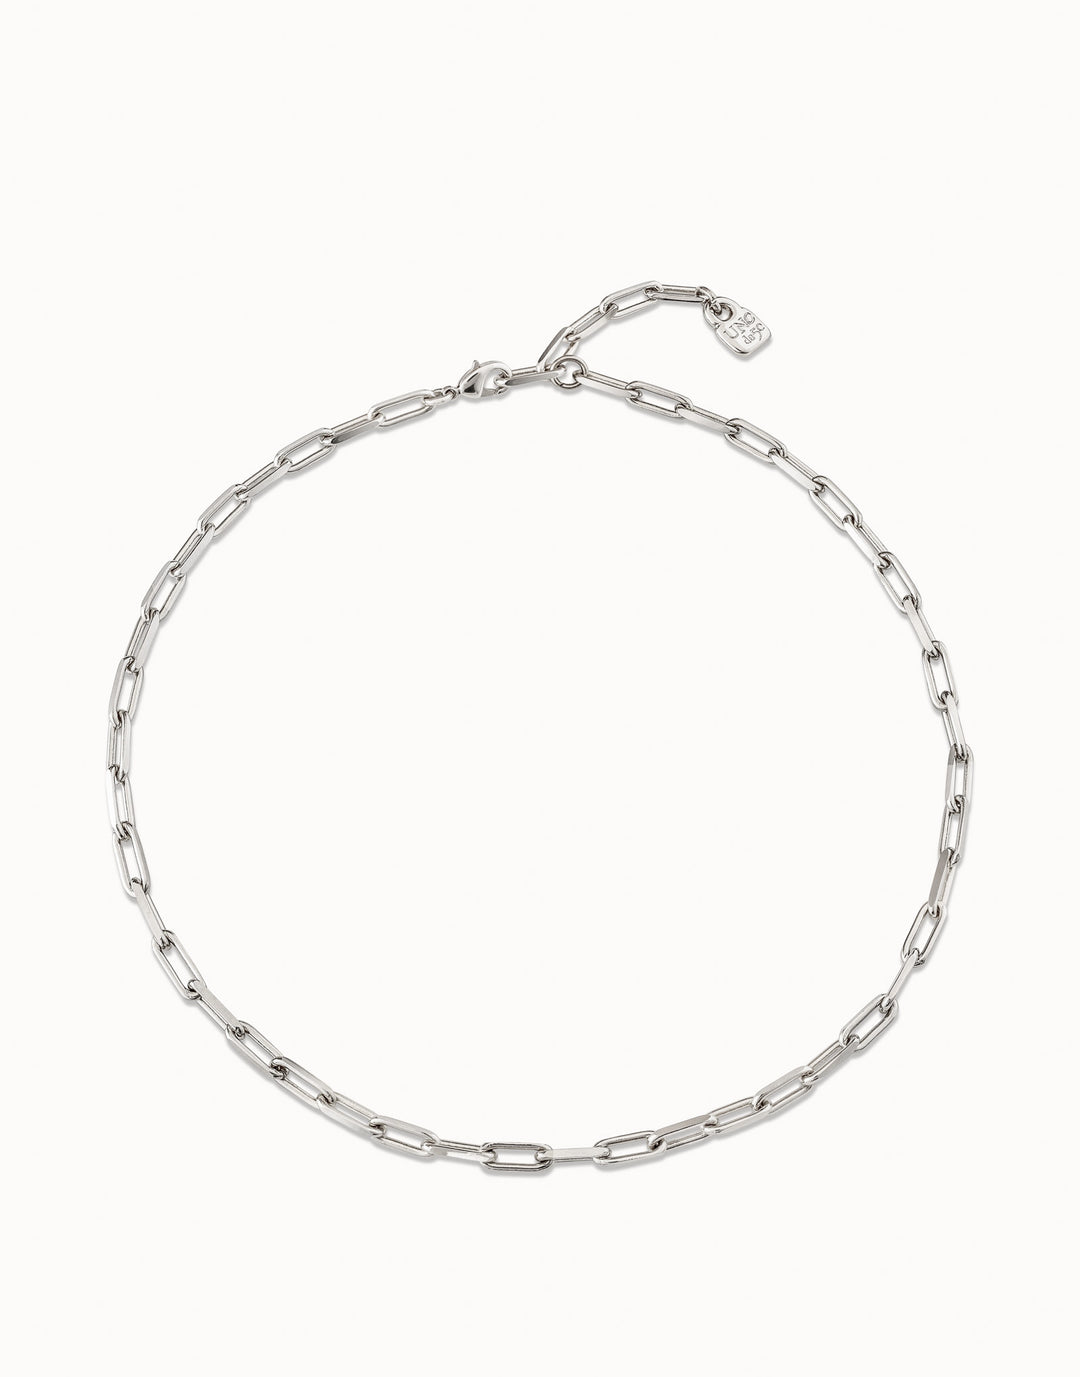 CHAIN 9 NECKLACE - SILVER